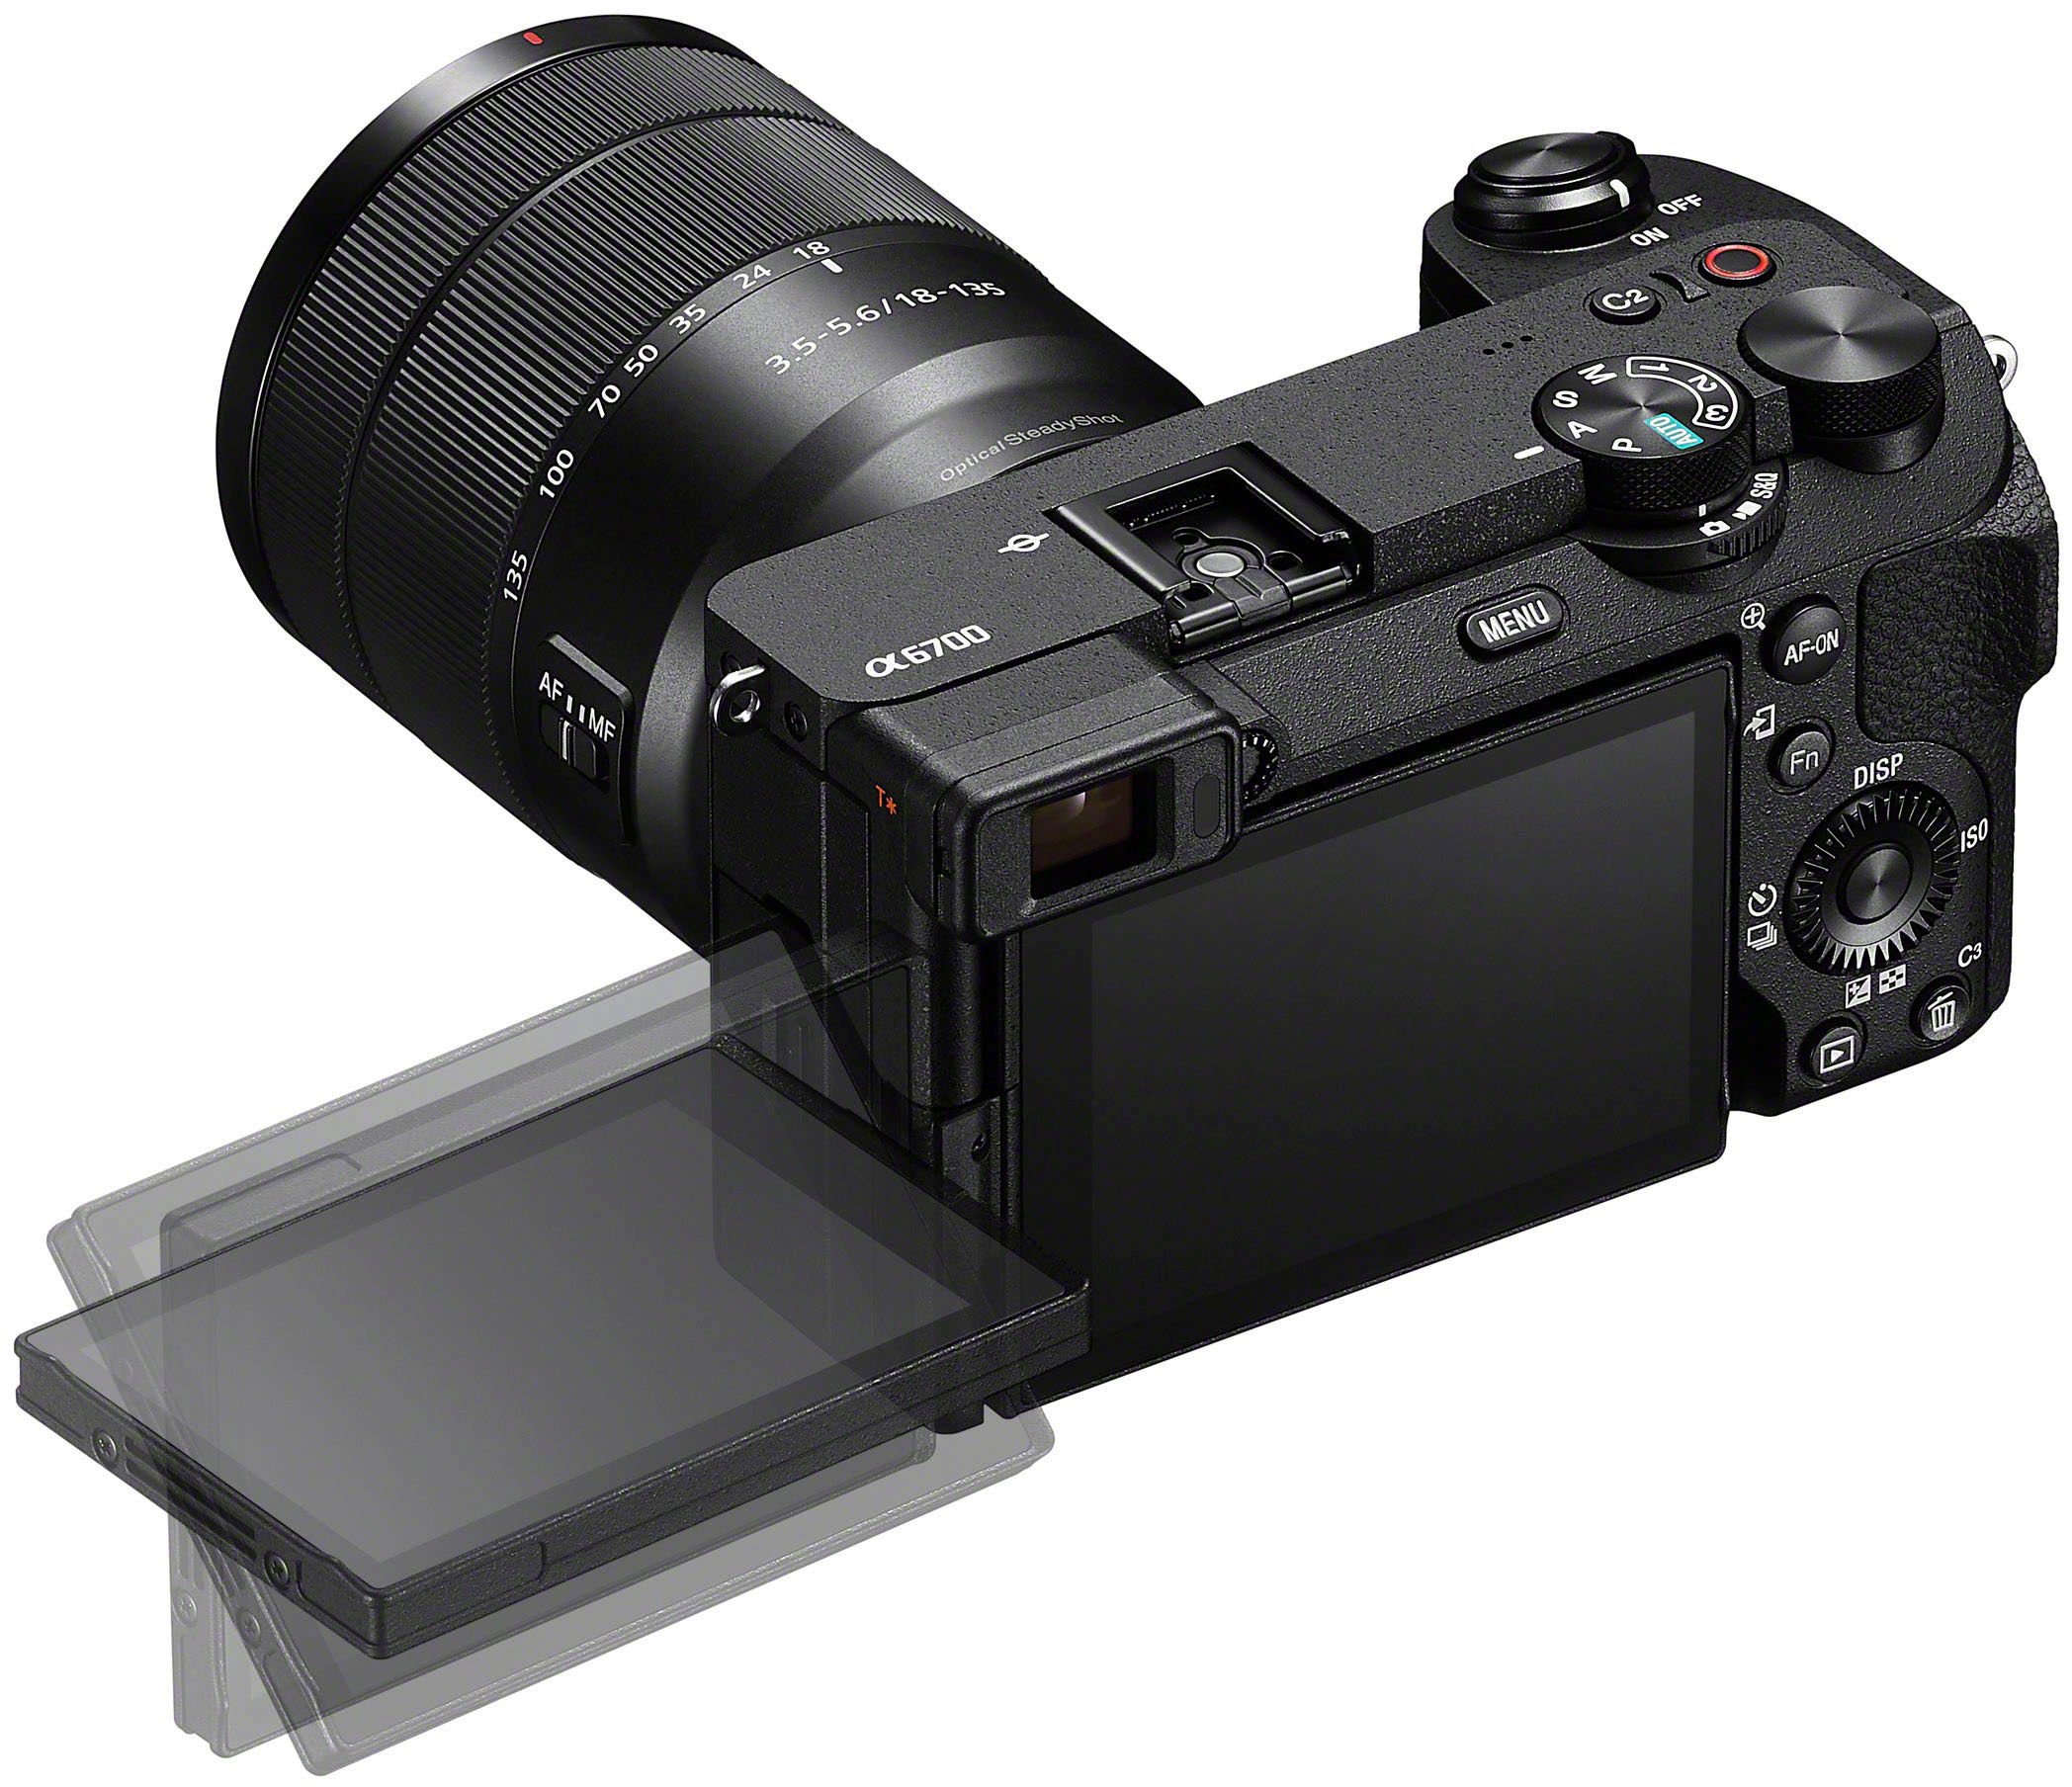 Sony Alpha with 6700 E - Buy APS-C mm Best Camera Mirrorless 18-135 ILCE6700M/B Lens Black